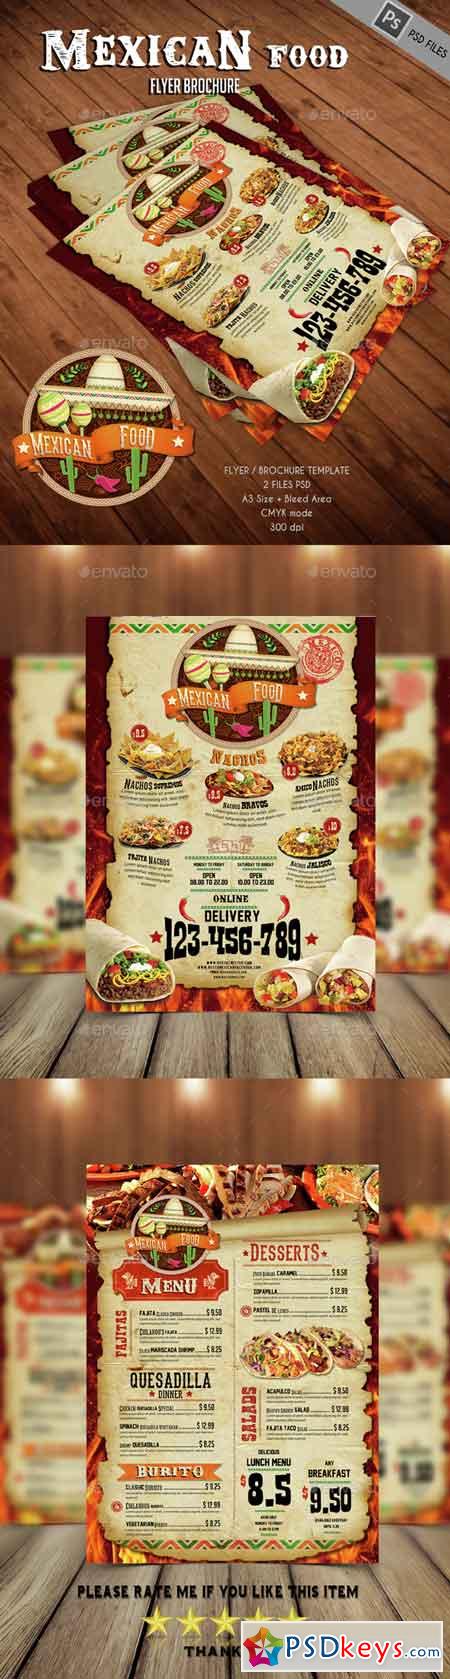 Mexican Food 14675797